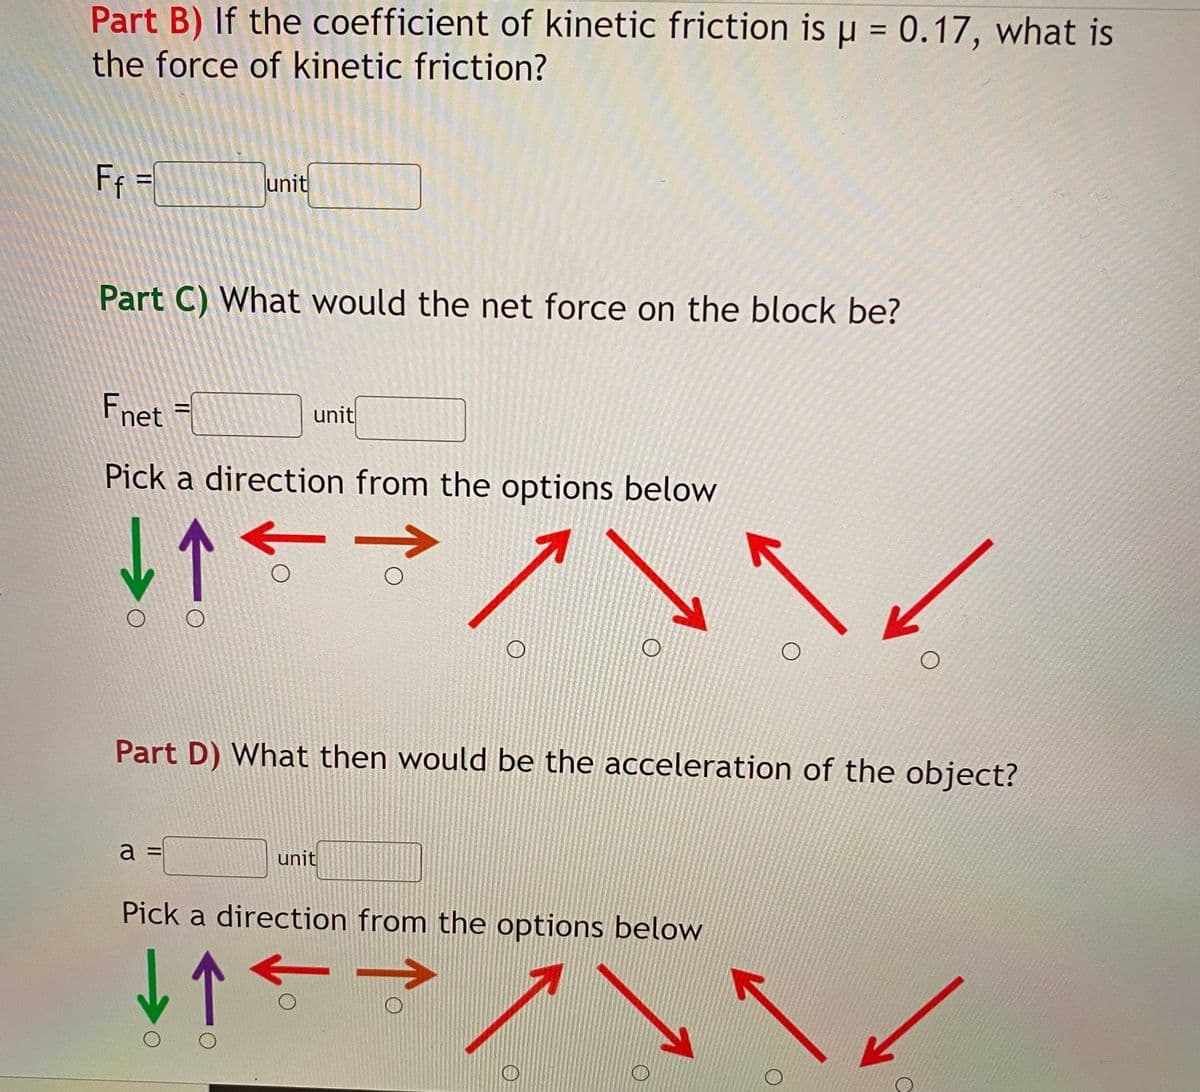 Part B) If the coefficient of kinetic friction is u = 0.17, what is
the force of kinetic friction?
F =
unit
Part C) What would the net force on the block be?
Fnet =
unit
Pick a direction from the options below
Part D) What then would be the acceleration of the object?
a =
unit
Pick a direction from the options below
